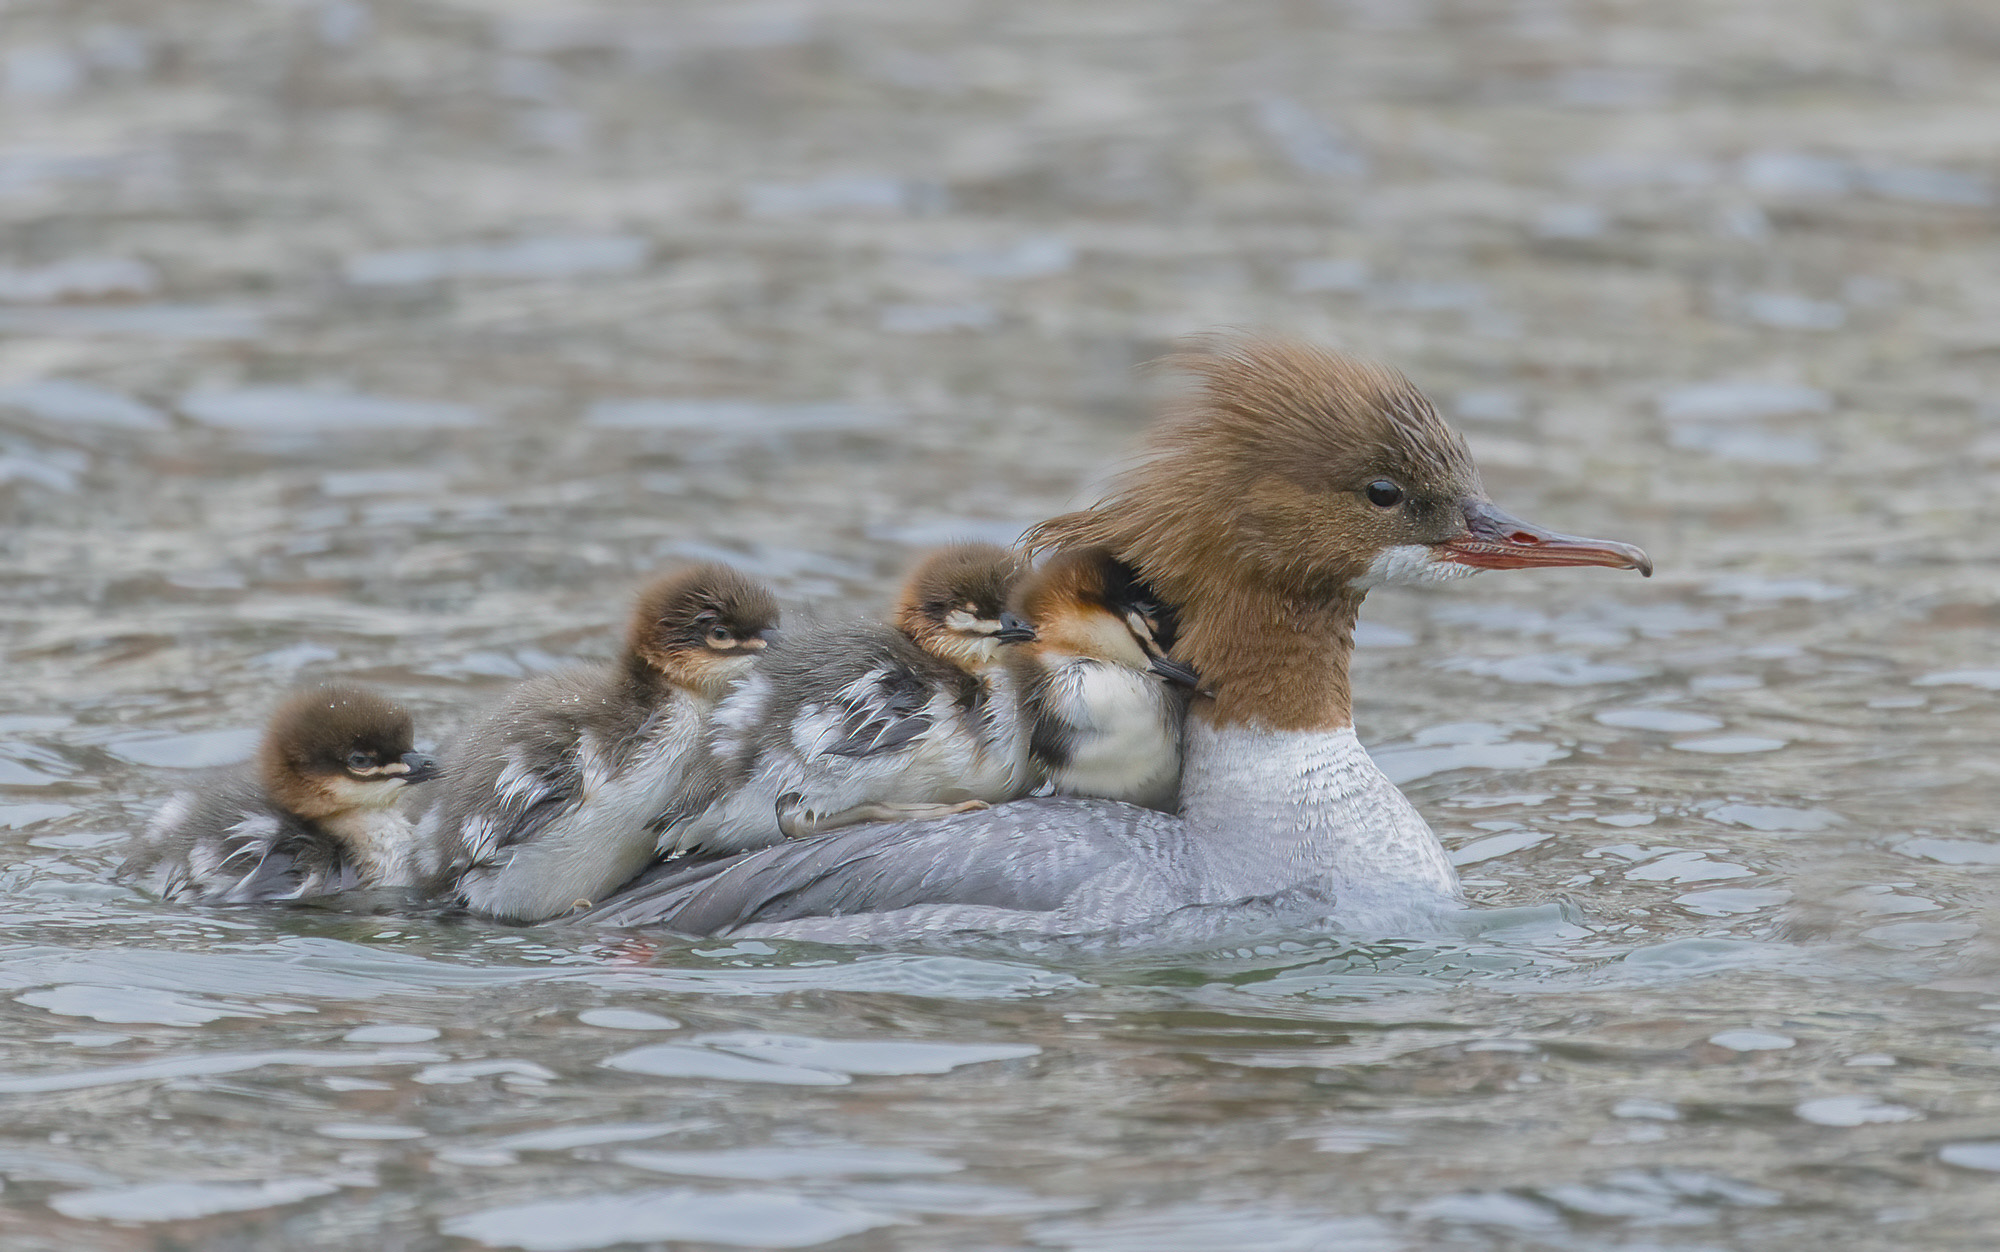 walking with the young, female greater merganser...